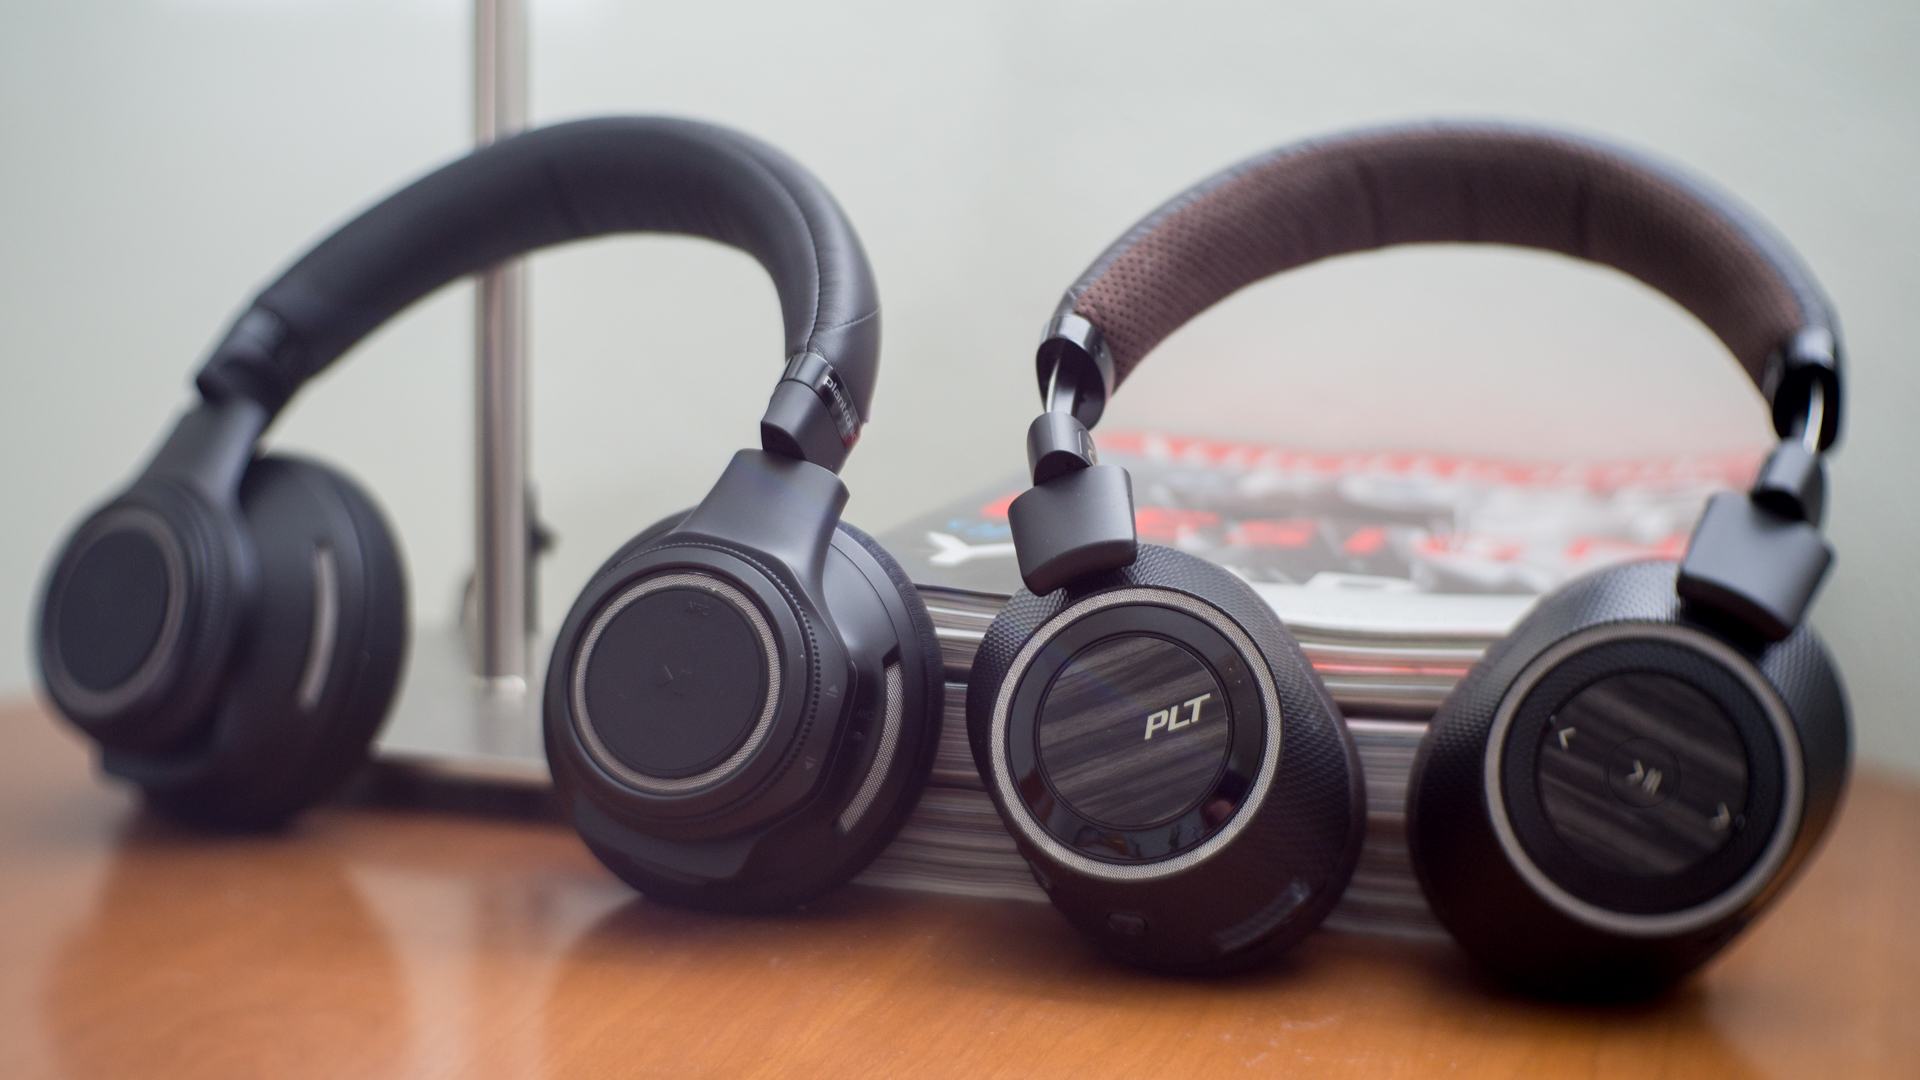 Prominent Features That Describe Good Quality Wireless Headphones